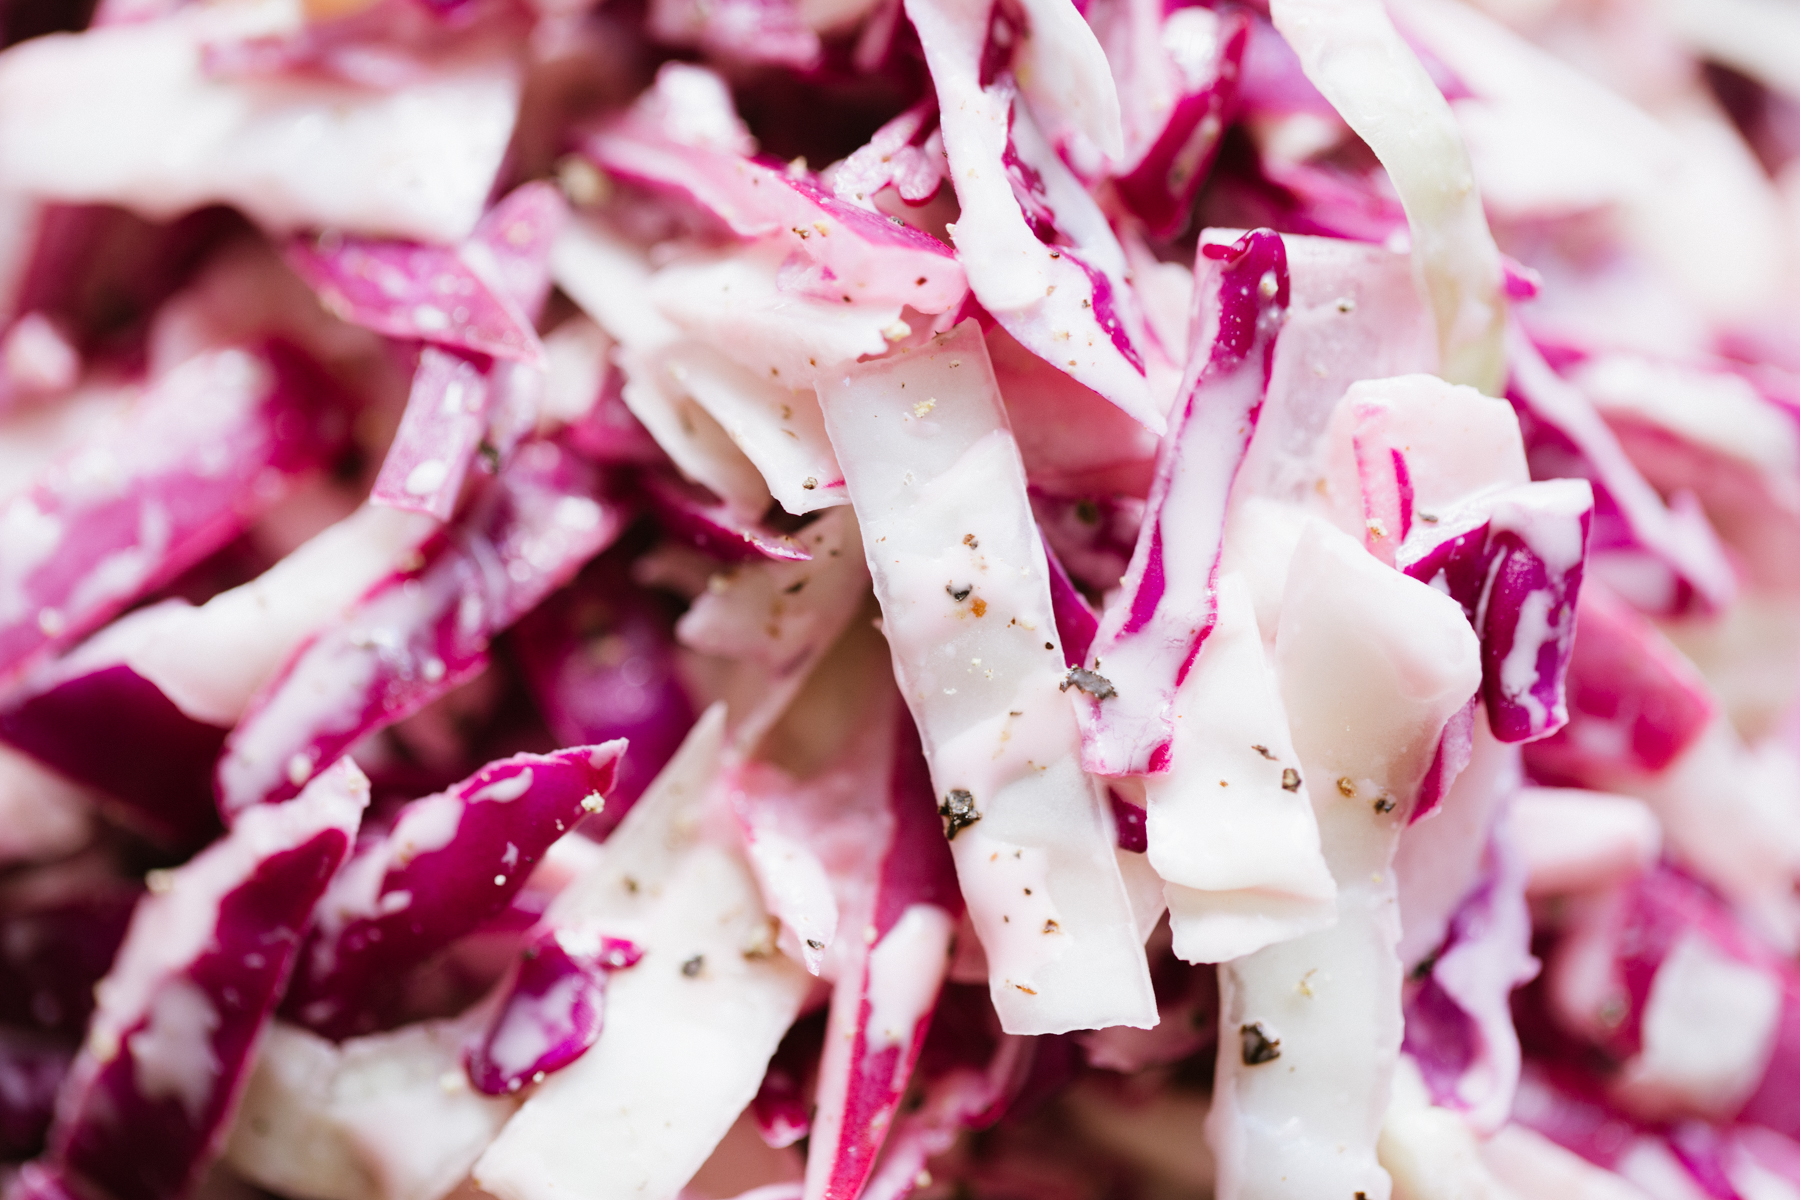 How to Make Paleo Cole Slaw Without a Recipe by Colorful Eats